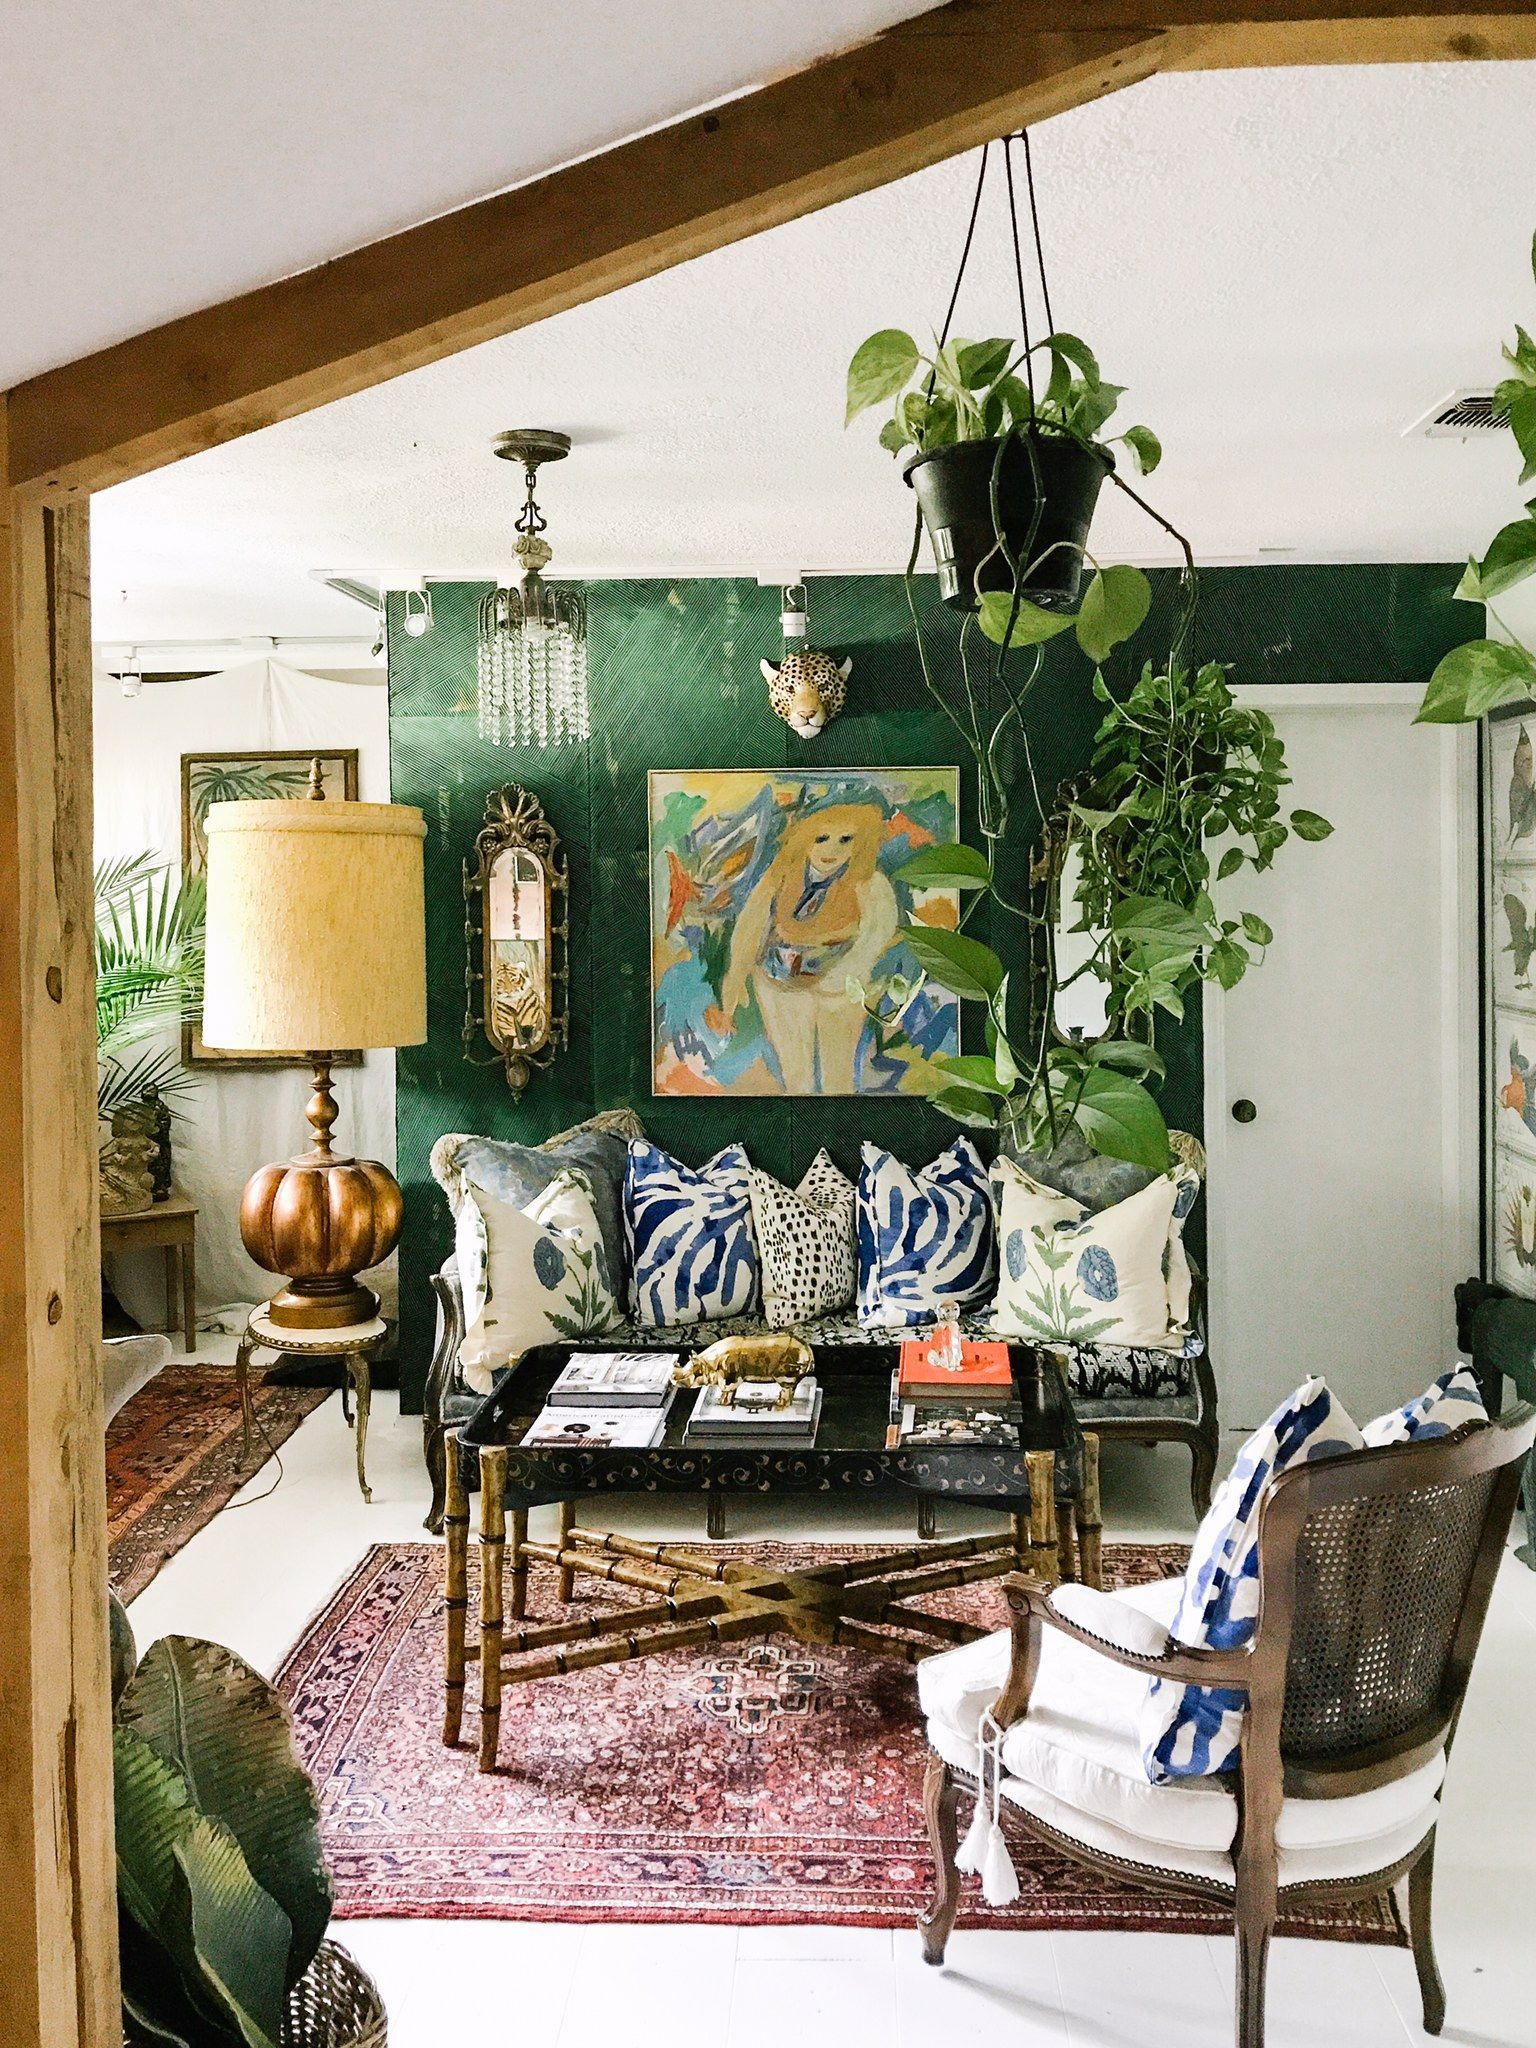 Beyond Minimalism: The Emerging Trends Of Maximalist Decor